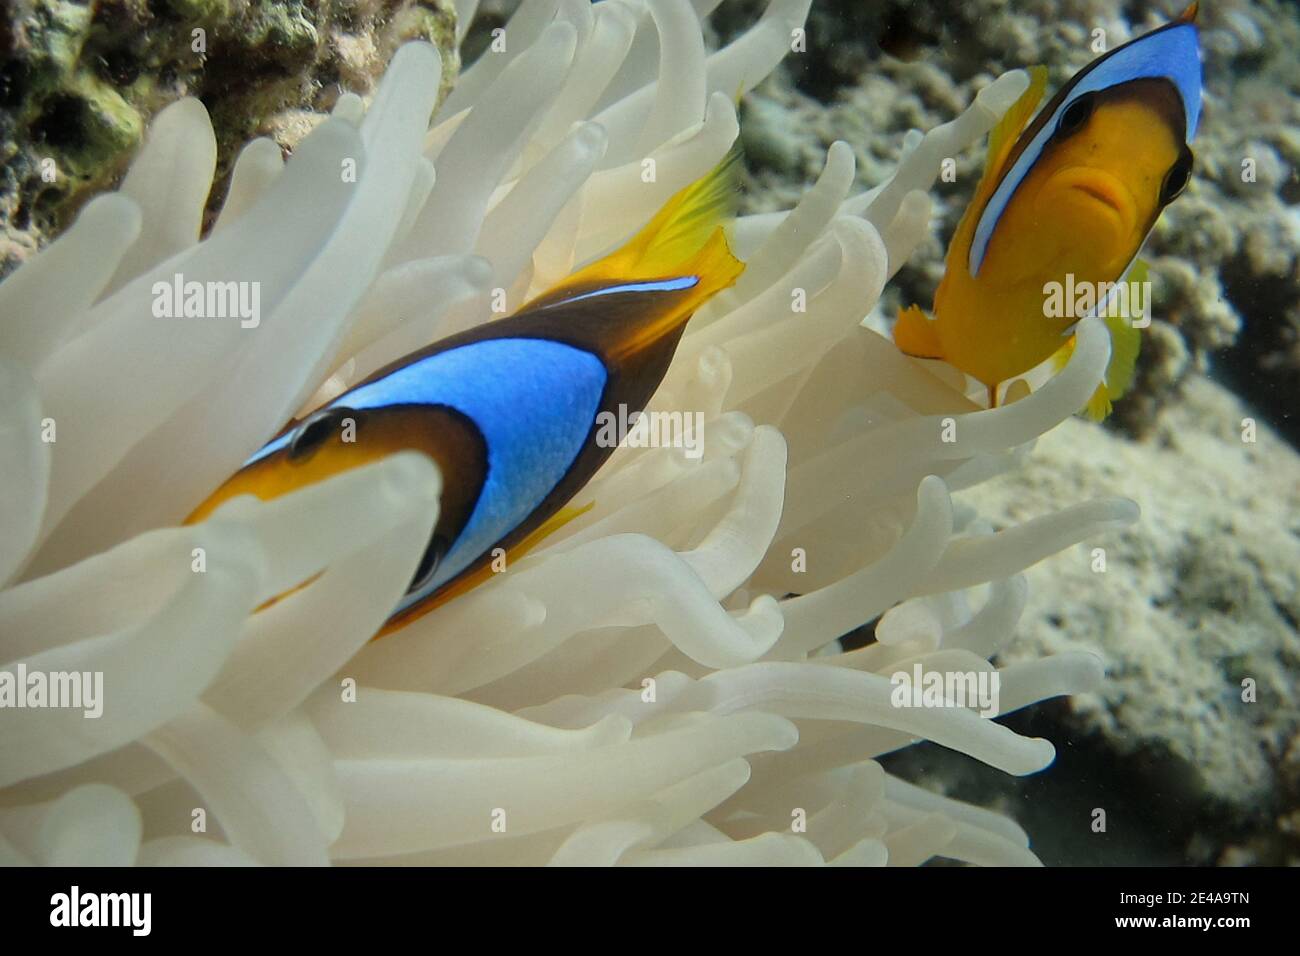 two anemone fish looking at camera Stock Photo